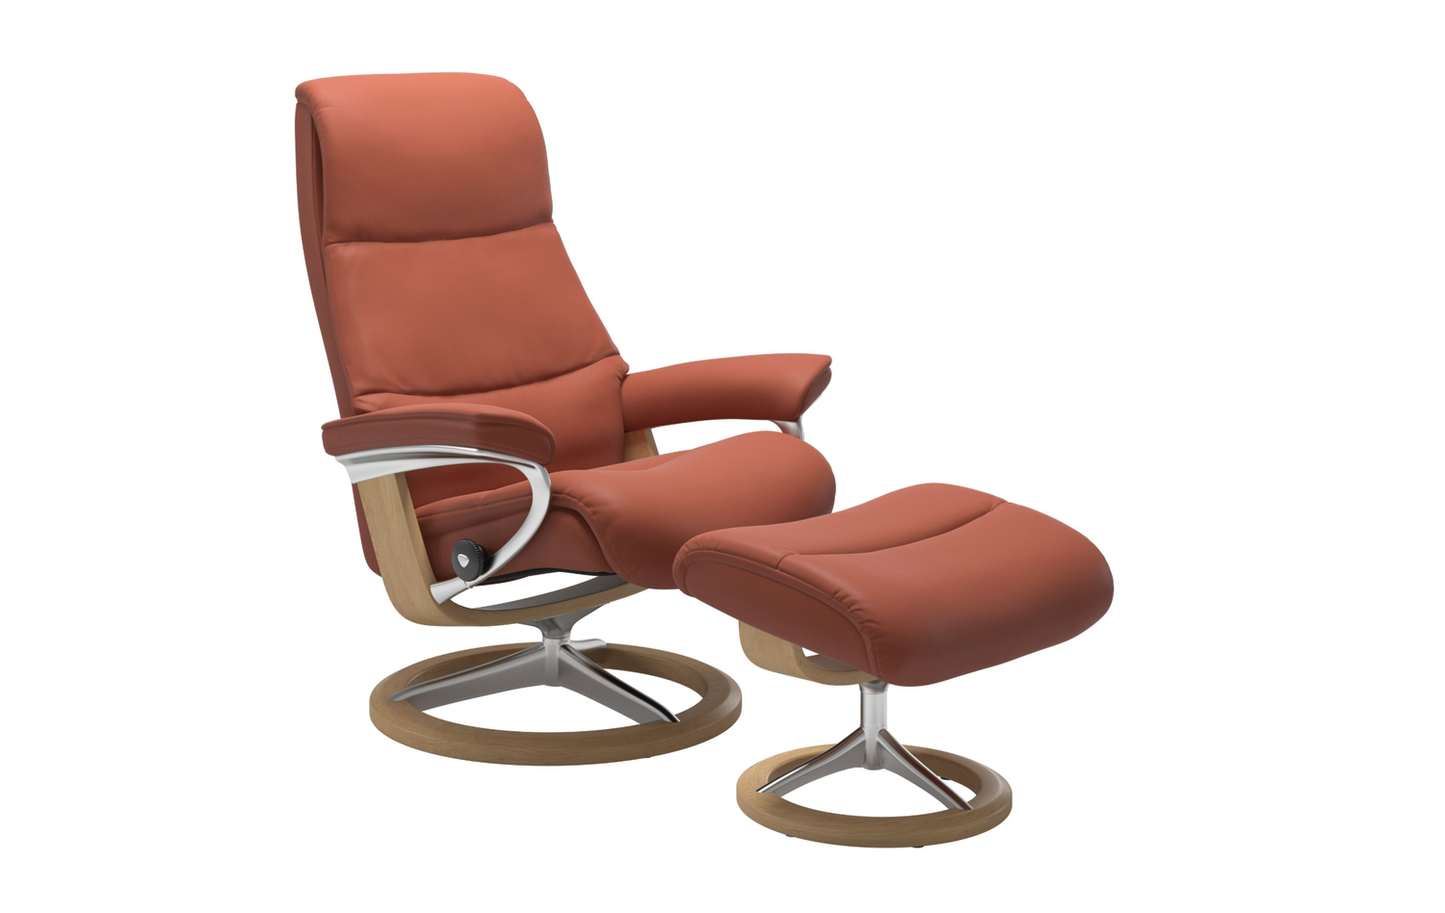 View SL Stressless – Recliners